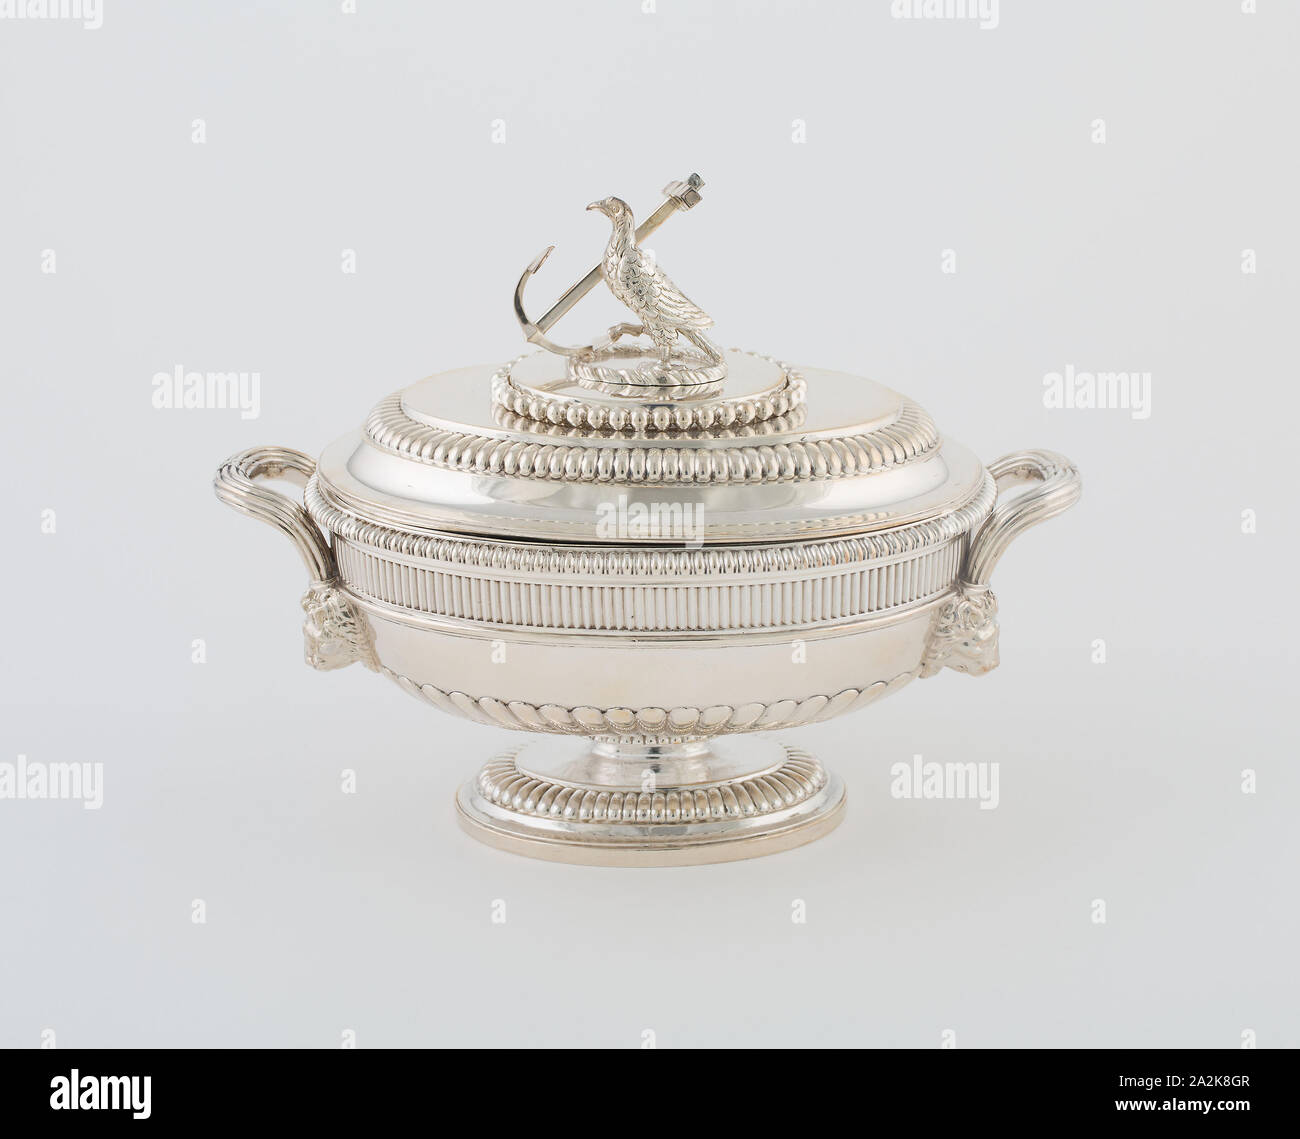 Sauce Tureen and Cover from the Hood Service, 1807/08, Paul Storr, English, 1771-1844, London, England, Sterling silver, 17.8 × 22.9 × 13 cm (7 × 9 × 5 1/8 in Stock Photo